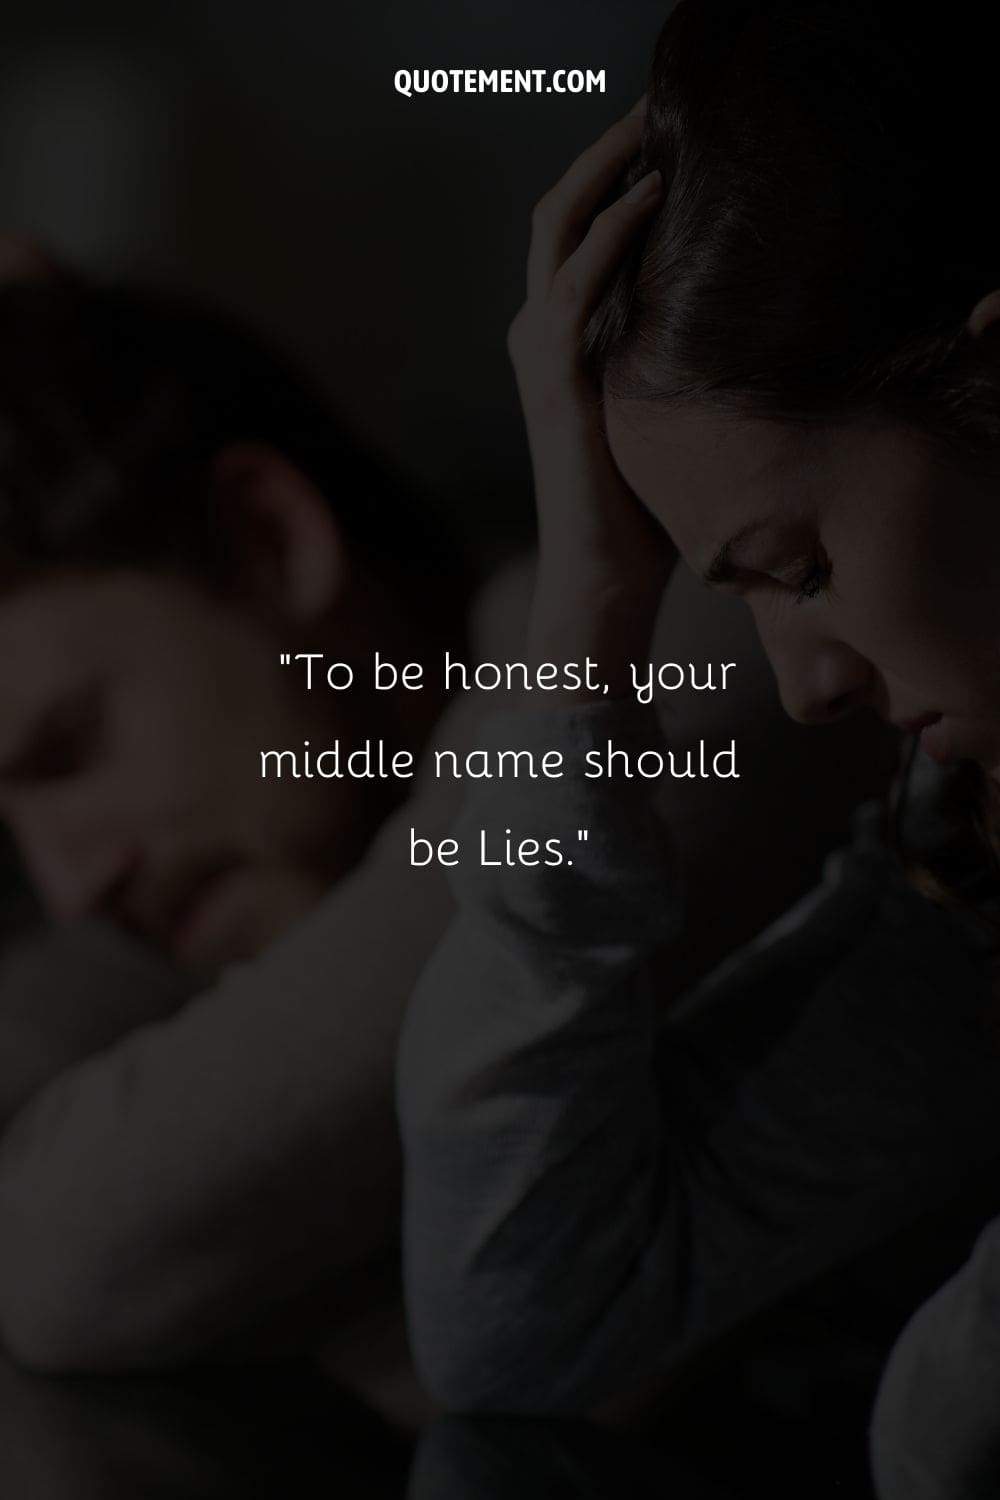 To be honest, your middle name should be Lies